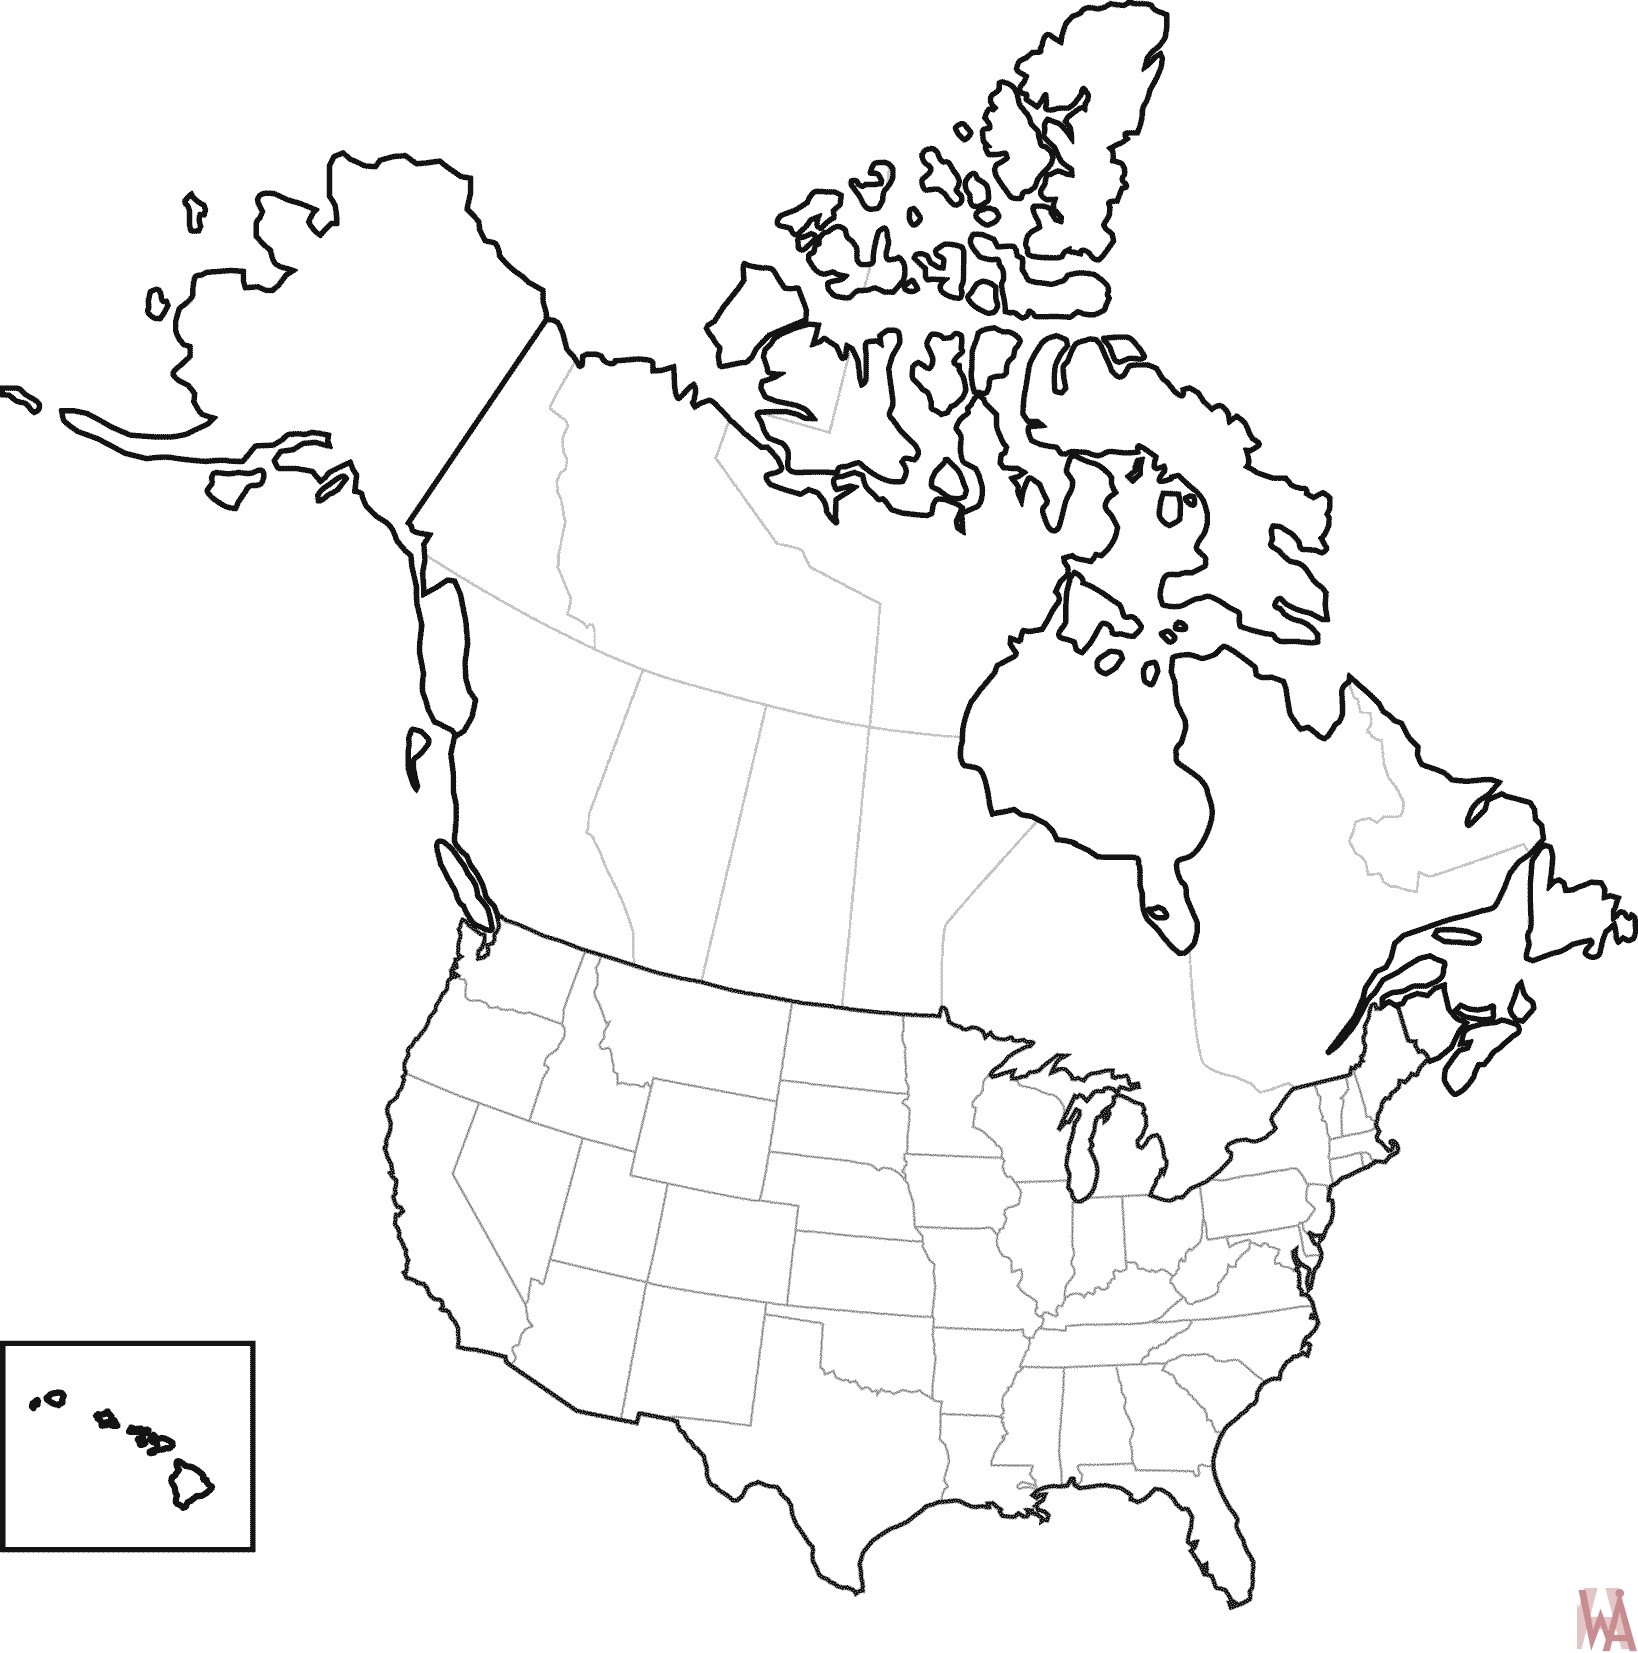 blank map of usa and canada Blank Outline Map Of The United States And Canada Whatsanswer blank map of usa and canada